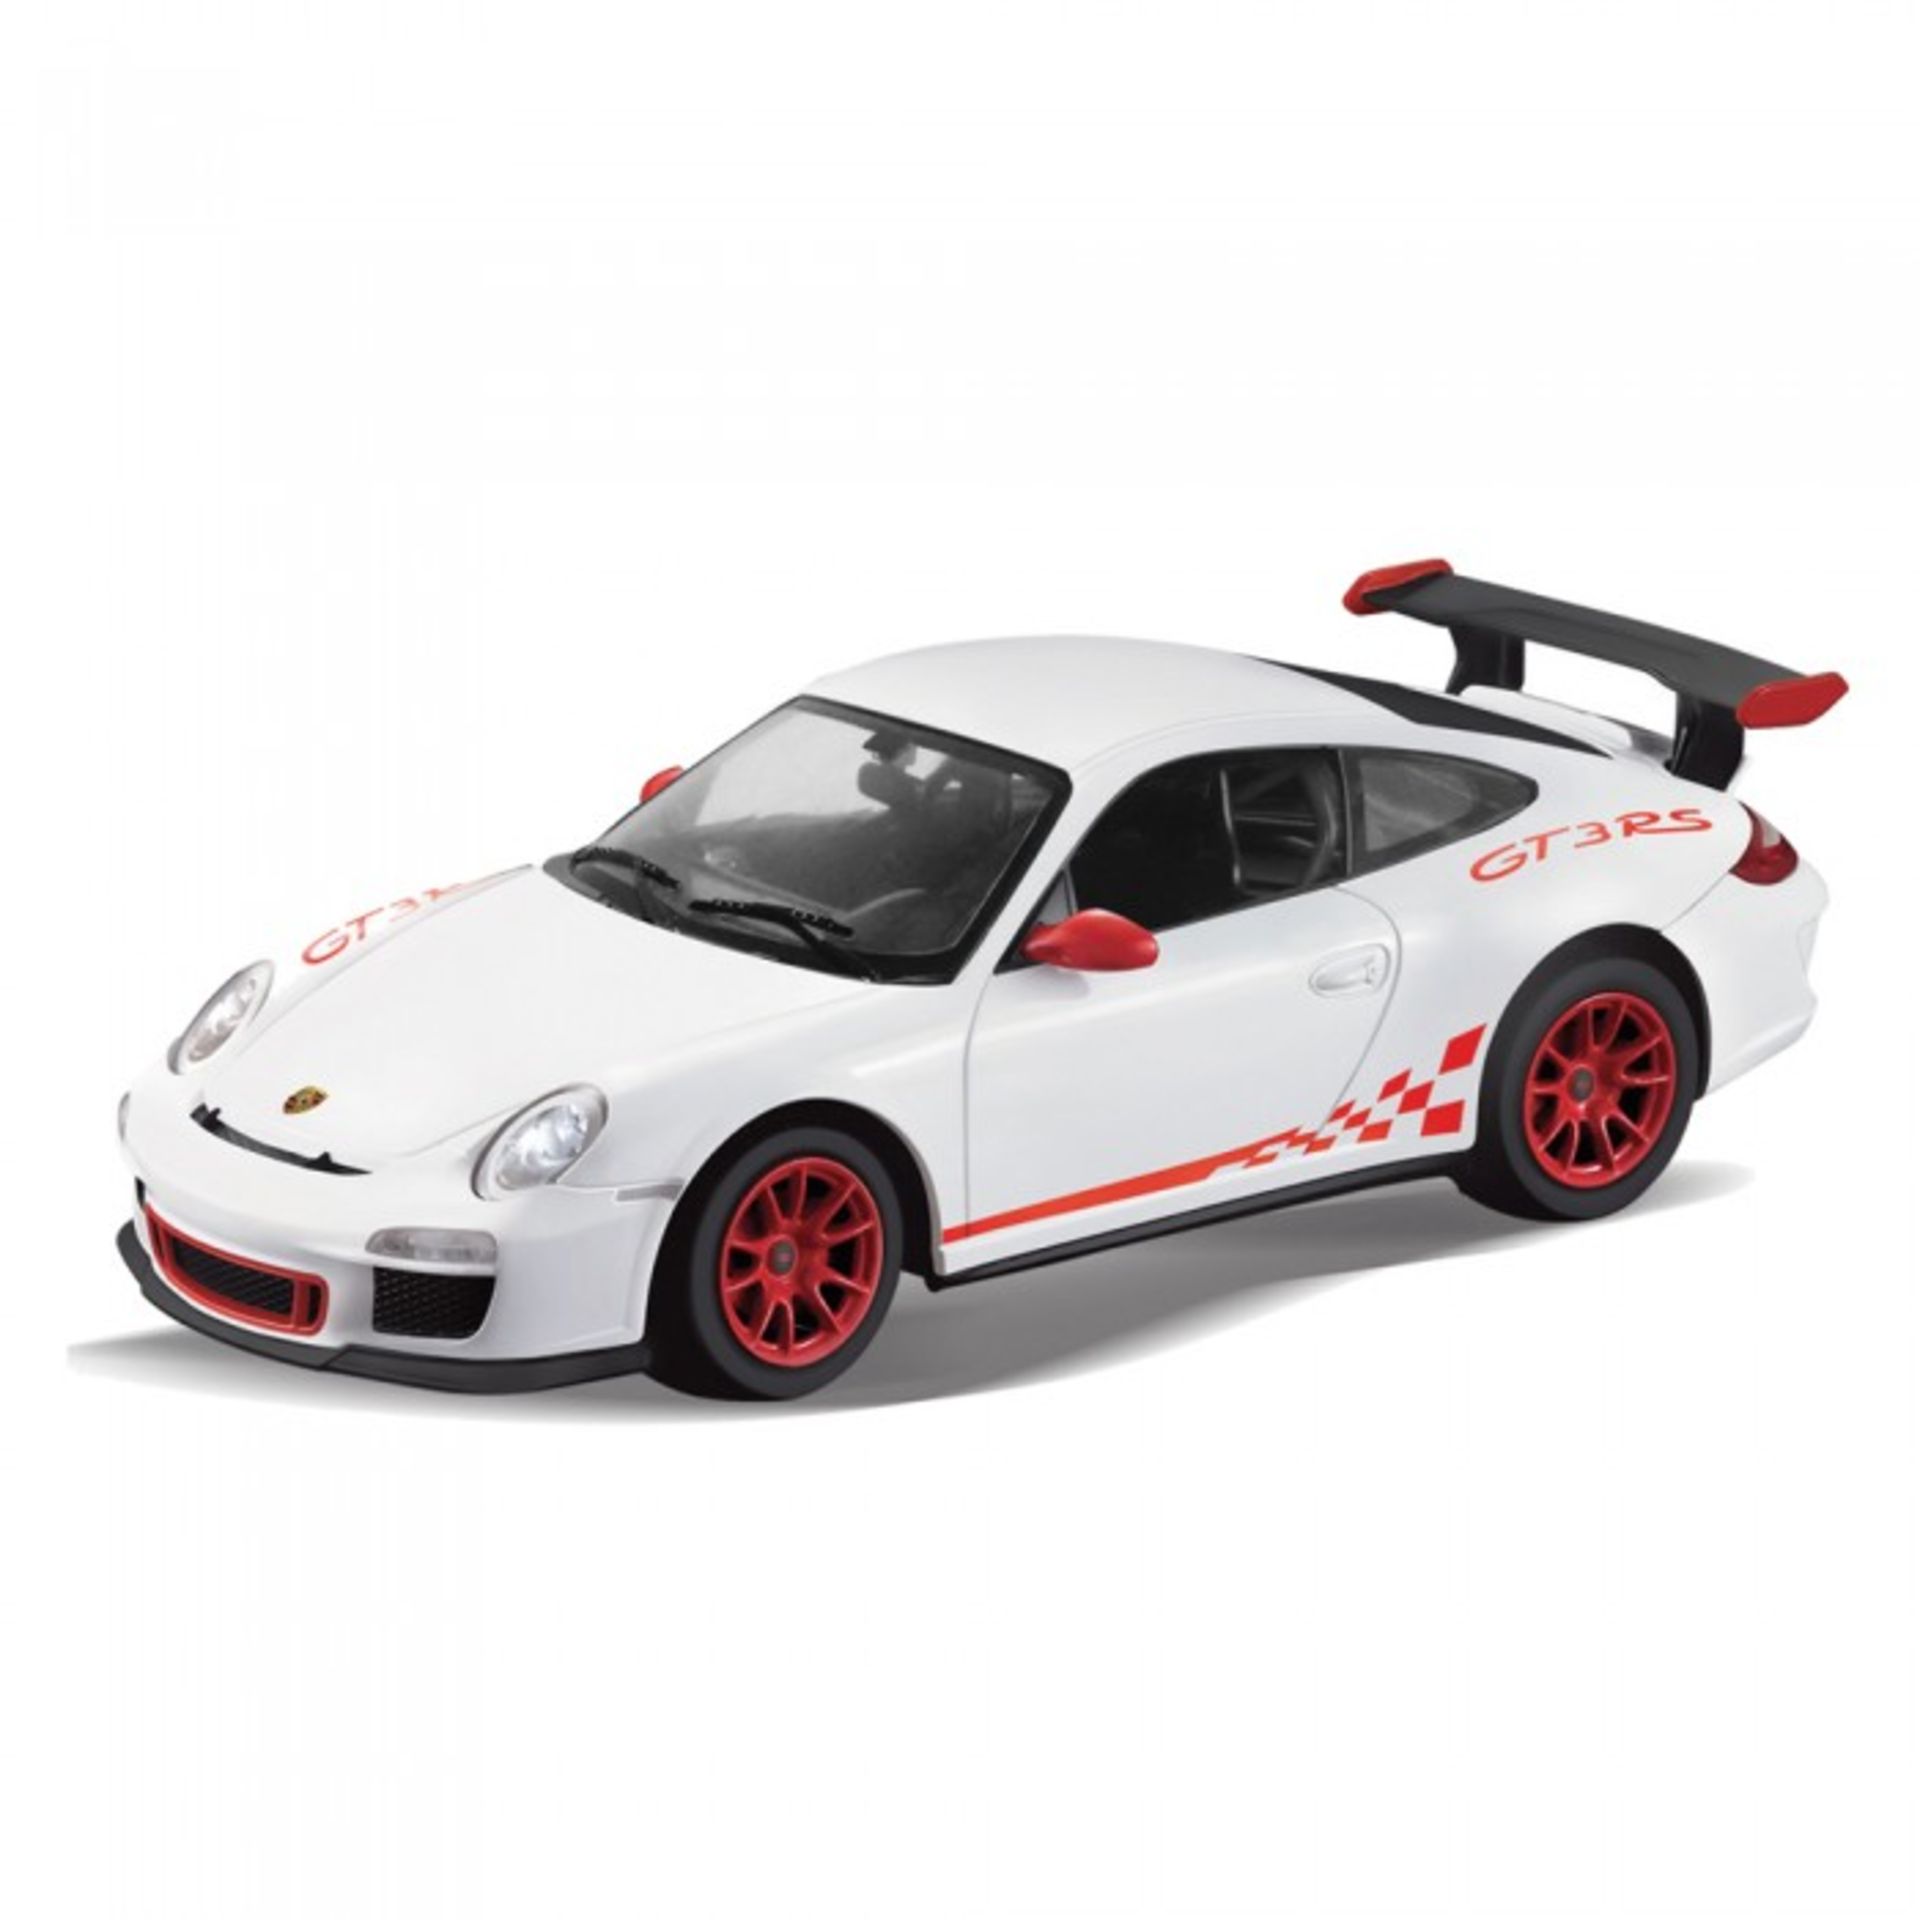 V 1:14 Remote Control Porsche 911 GT3 RS RRP £69.99 X  2  Bid price to be multiplied by Two